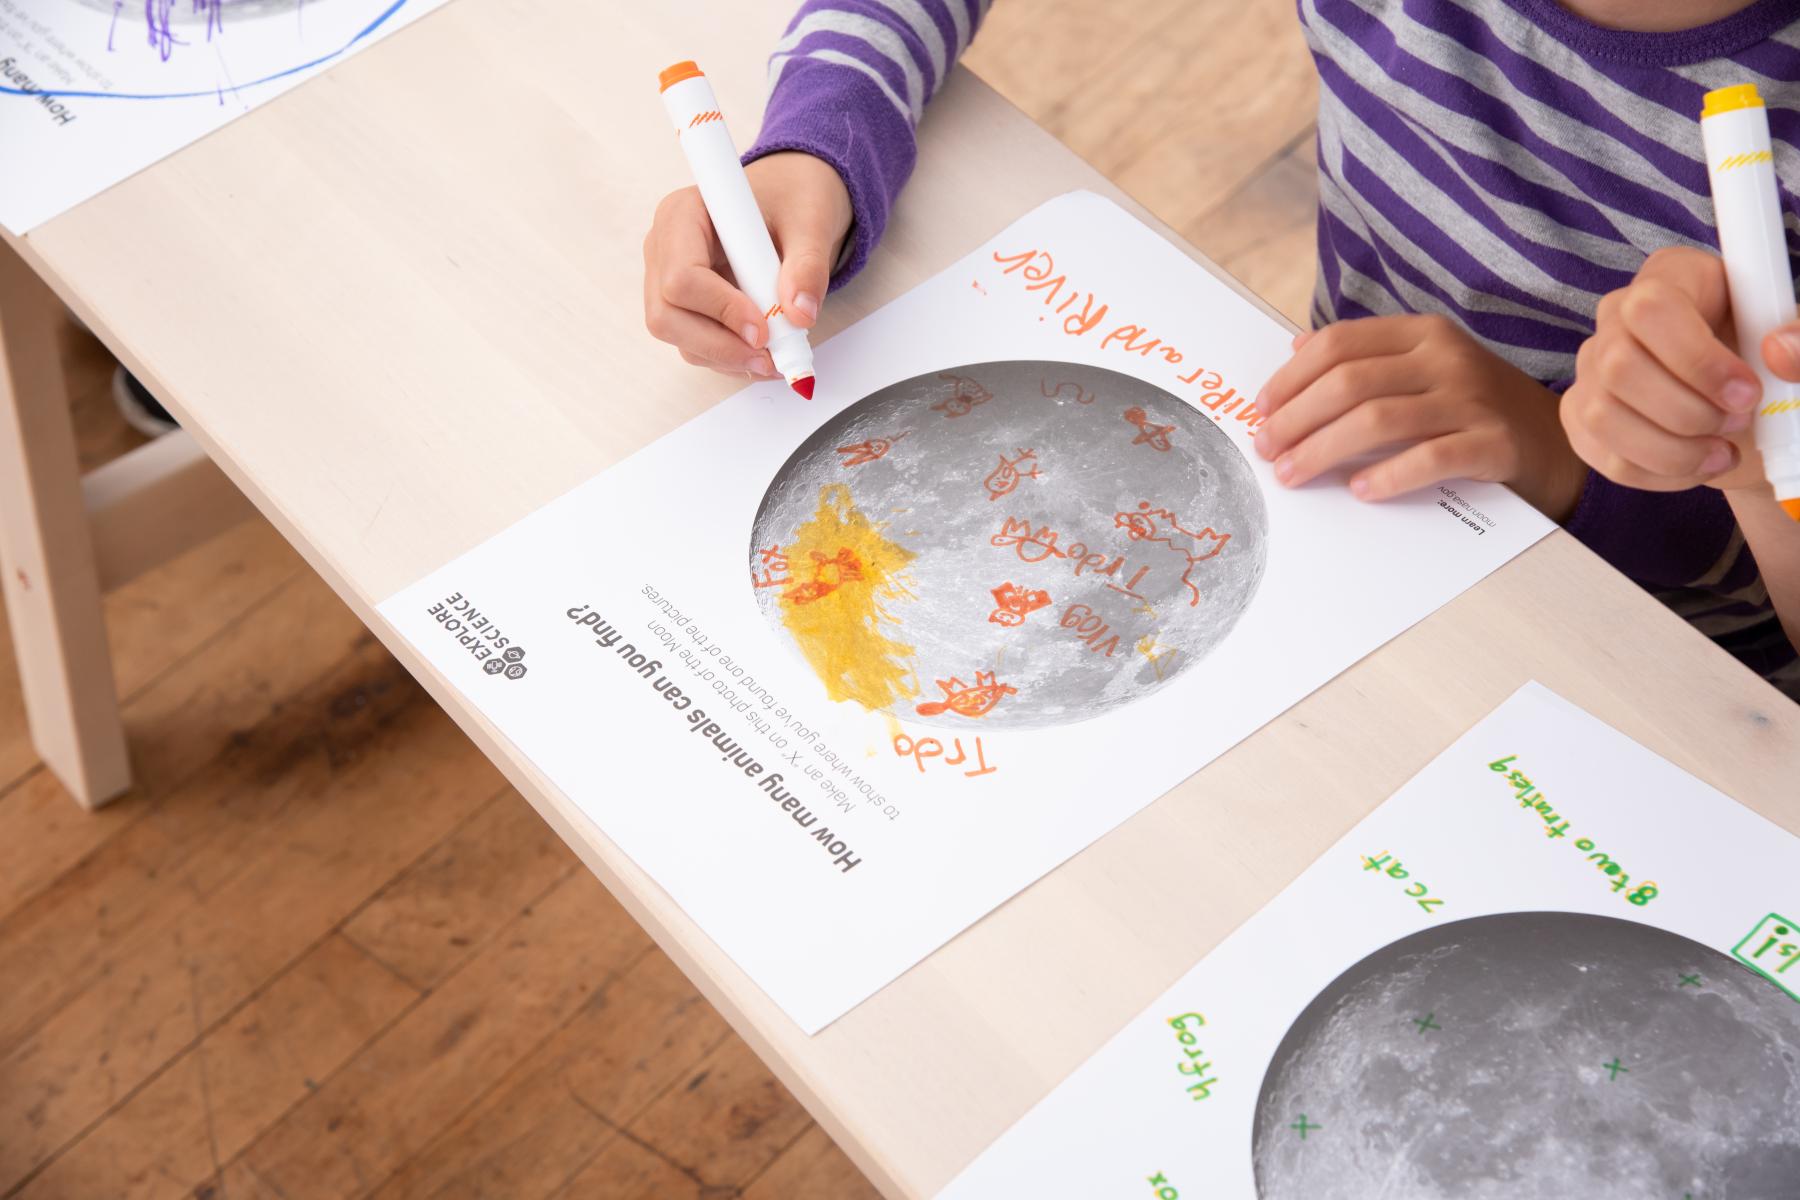 Learner records/draws what she sees on the moon poster from a distance